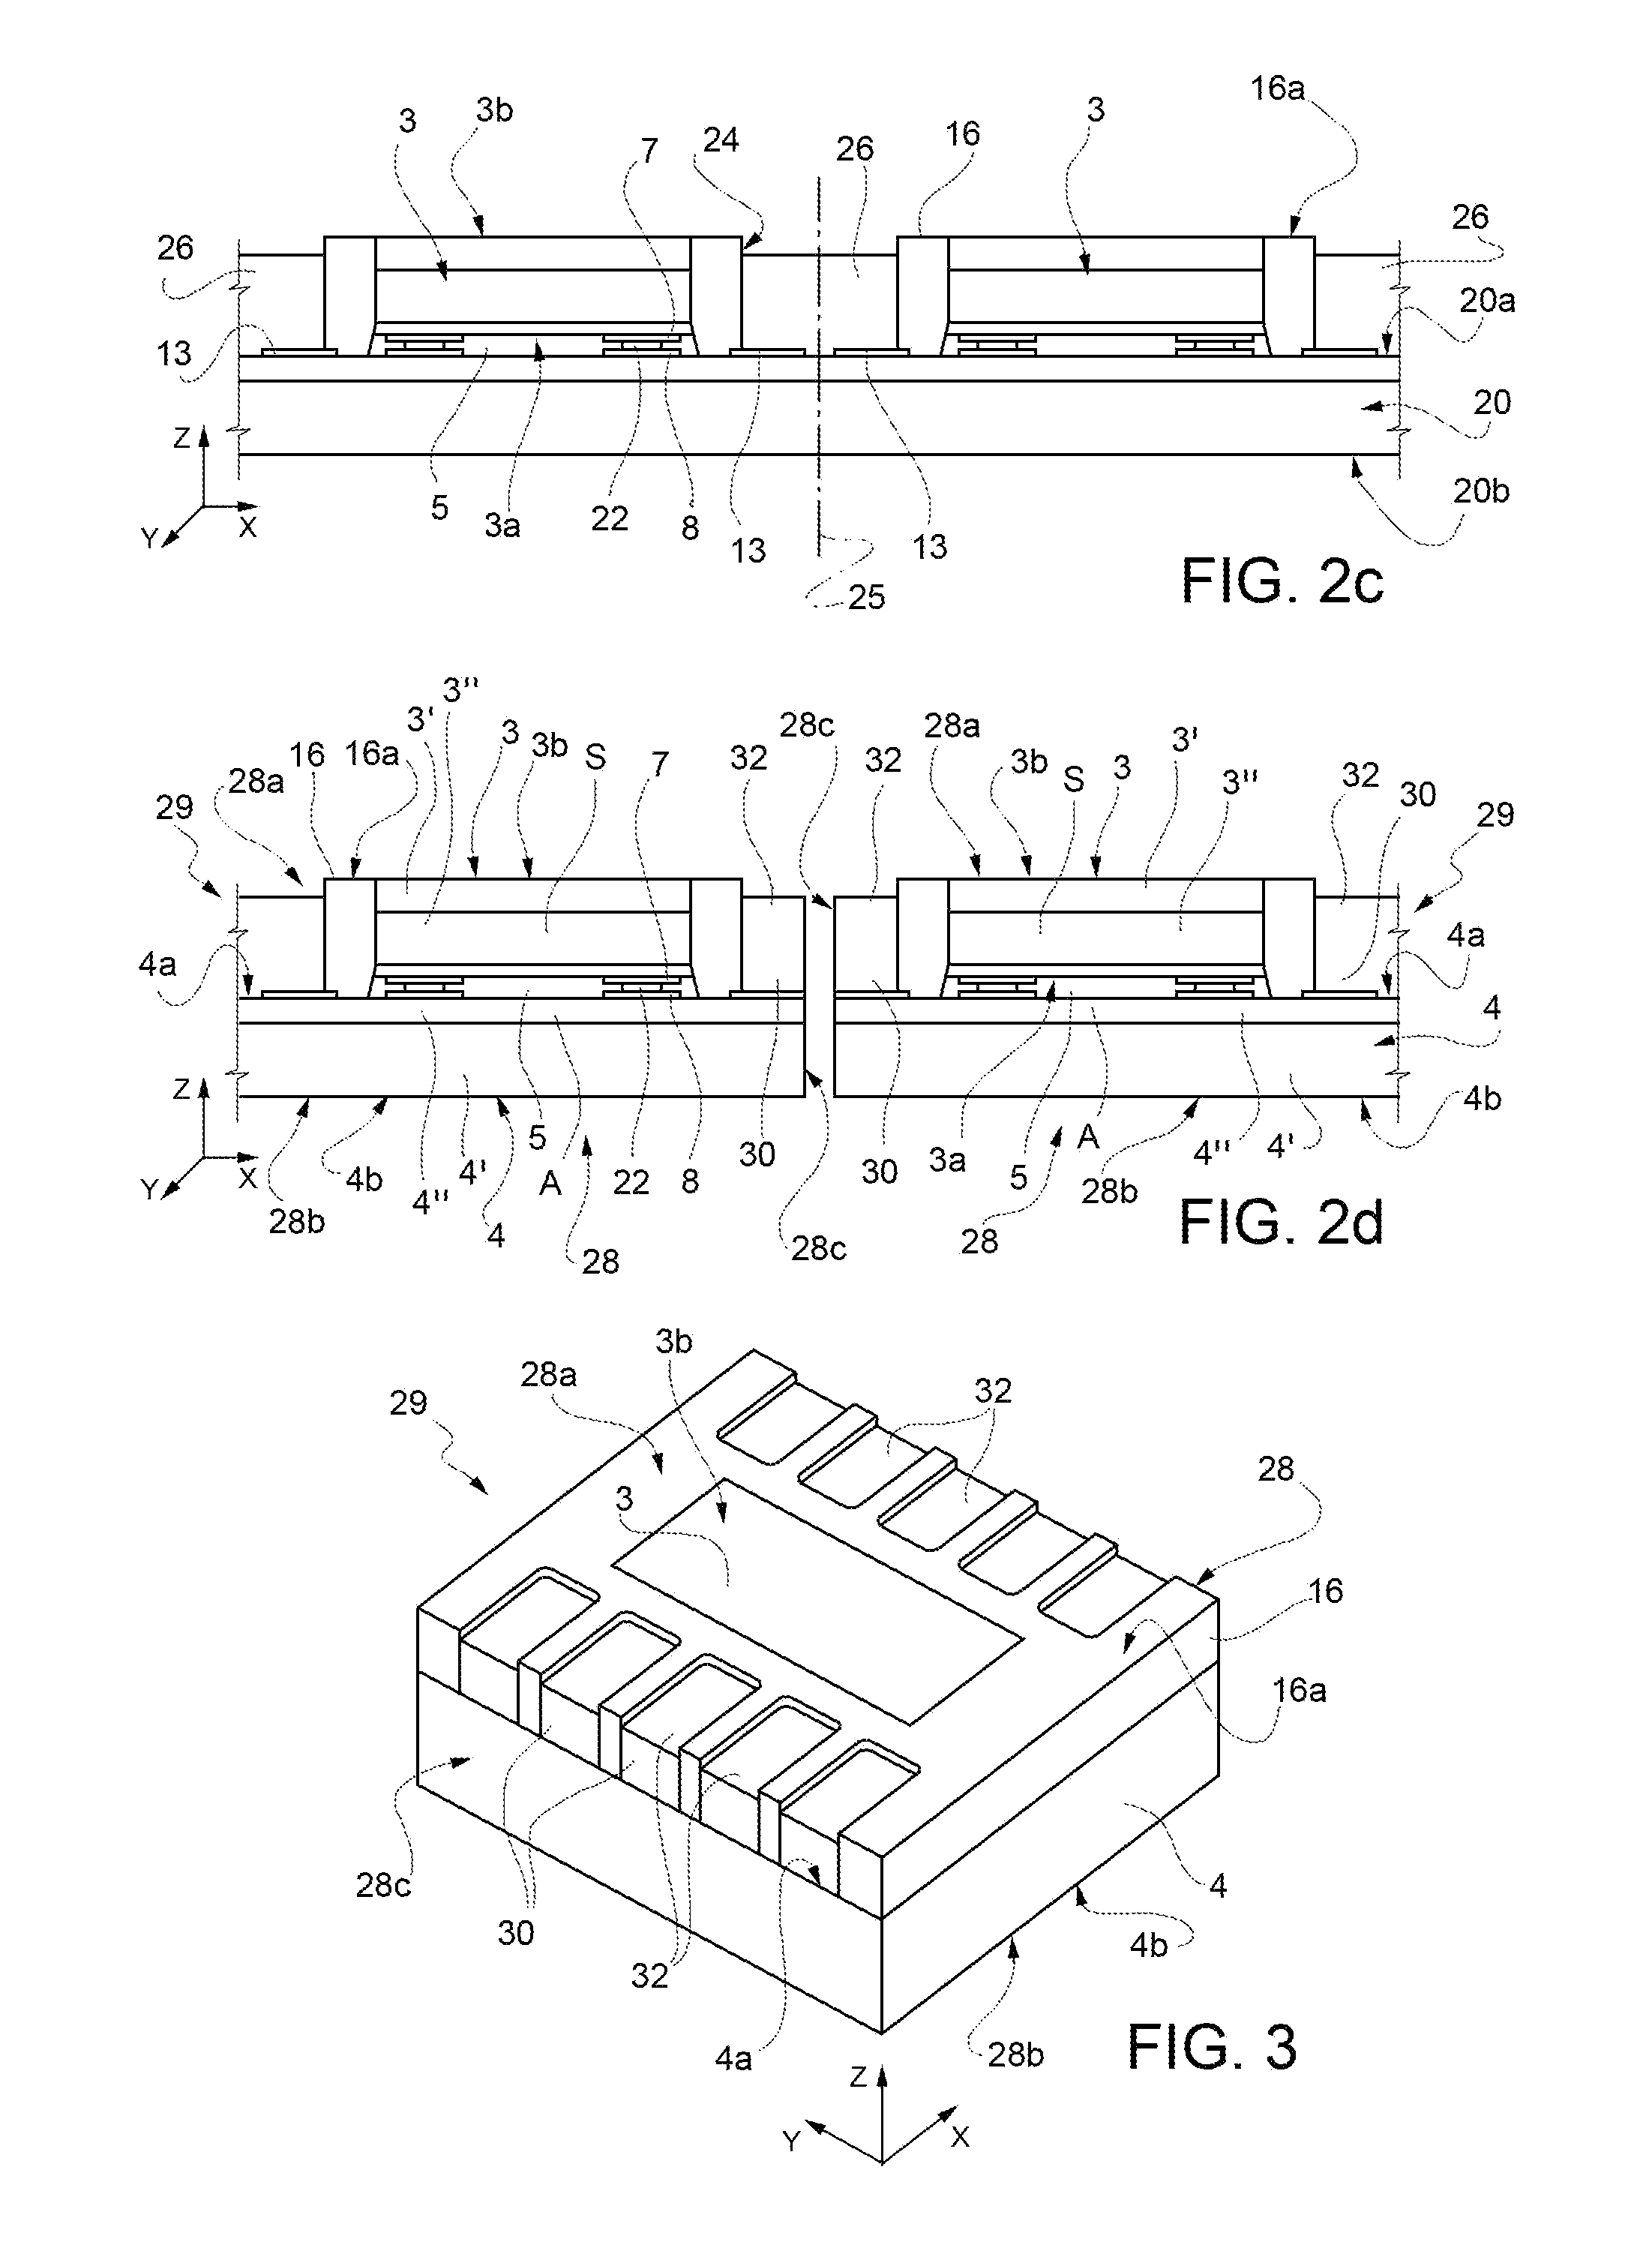 Wafer level package for a MEMS sensor device and corresponding manufacturing process